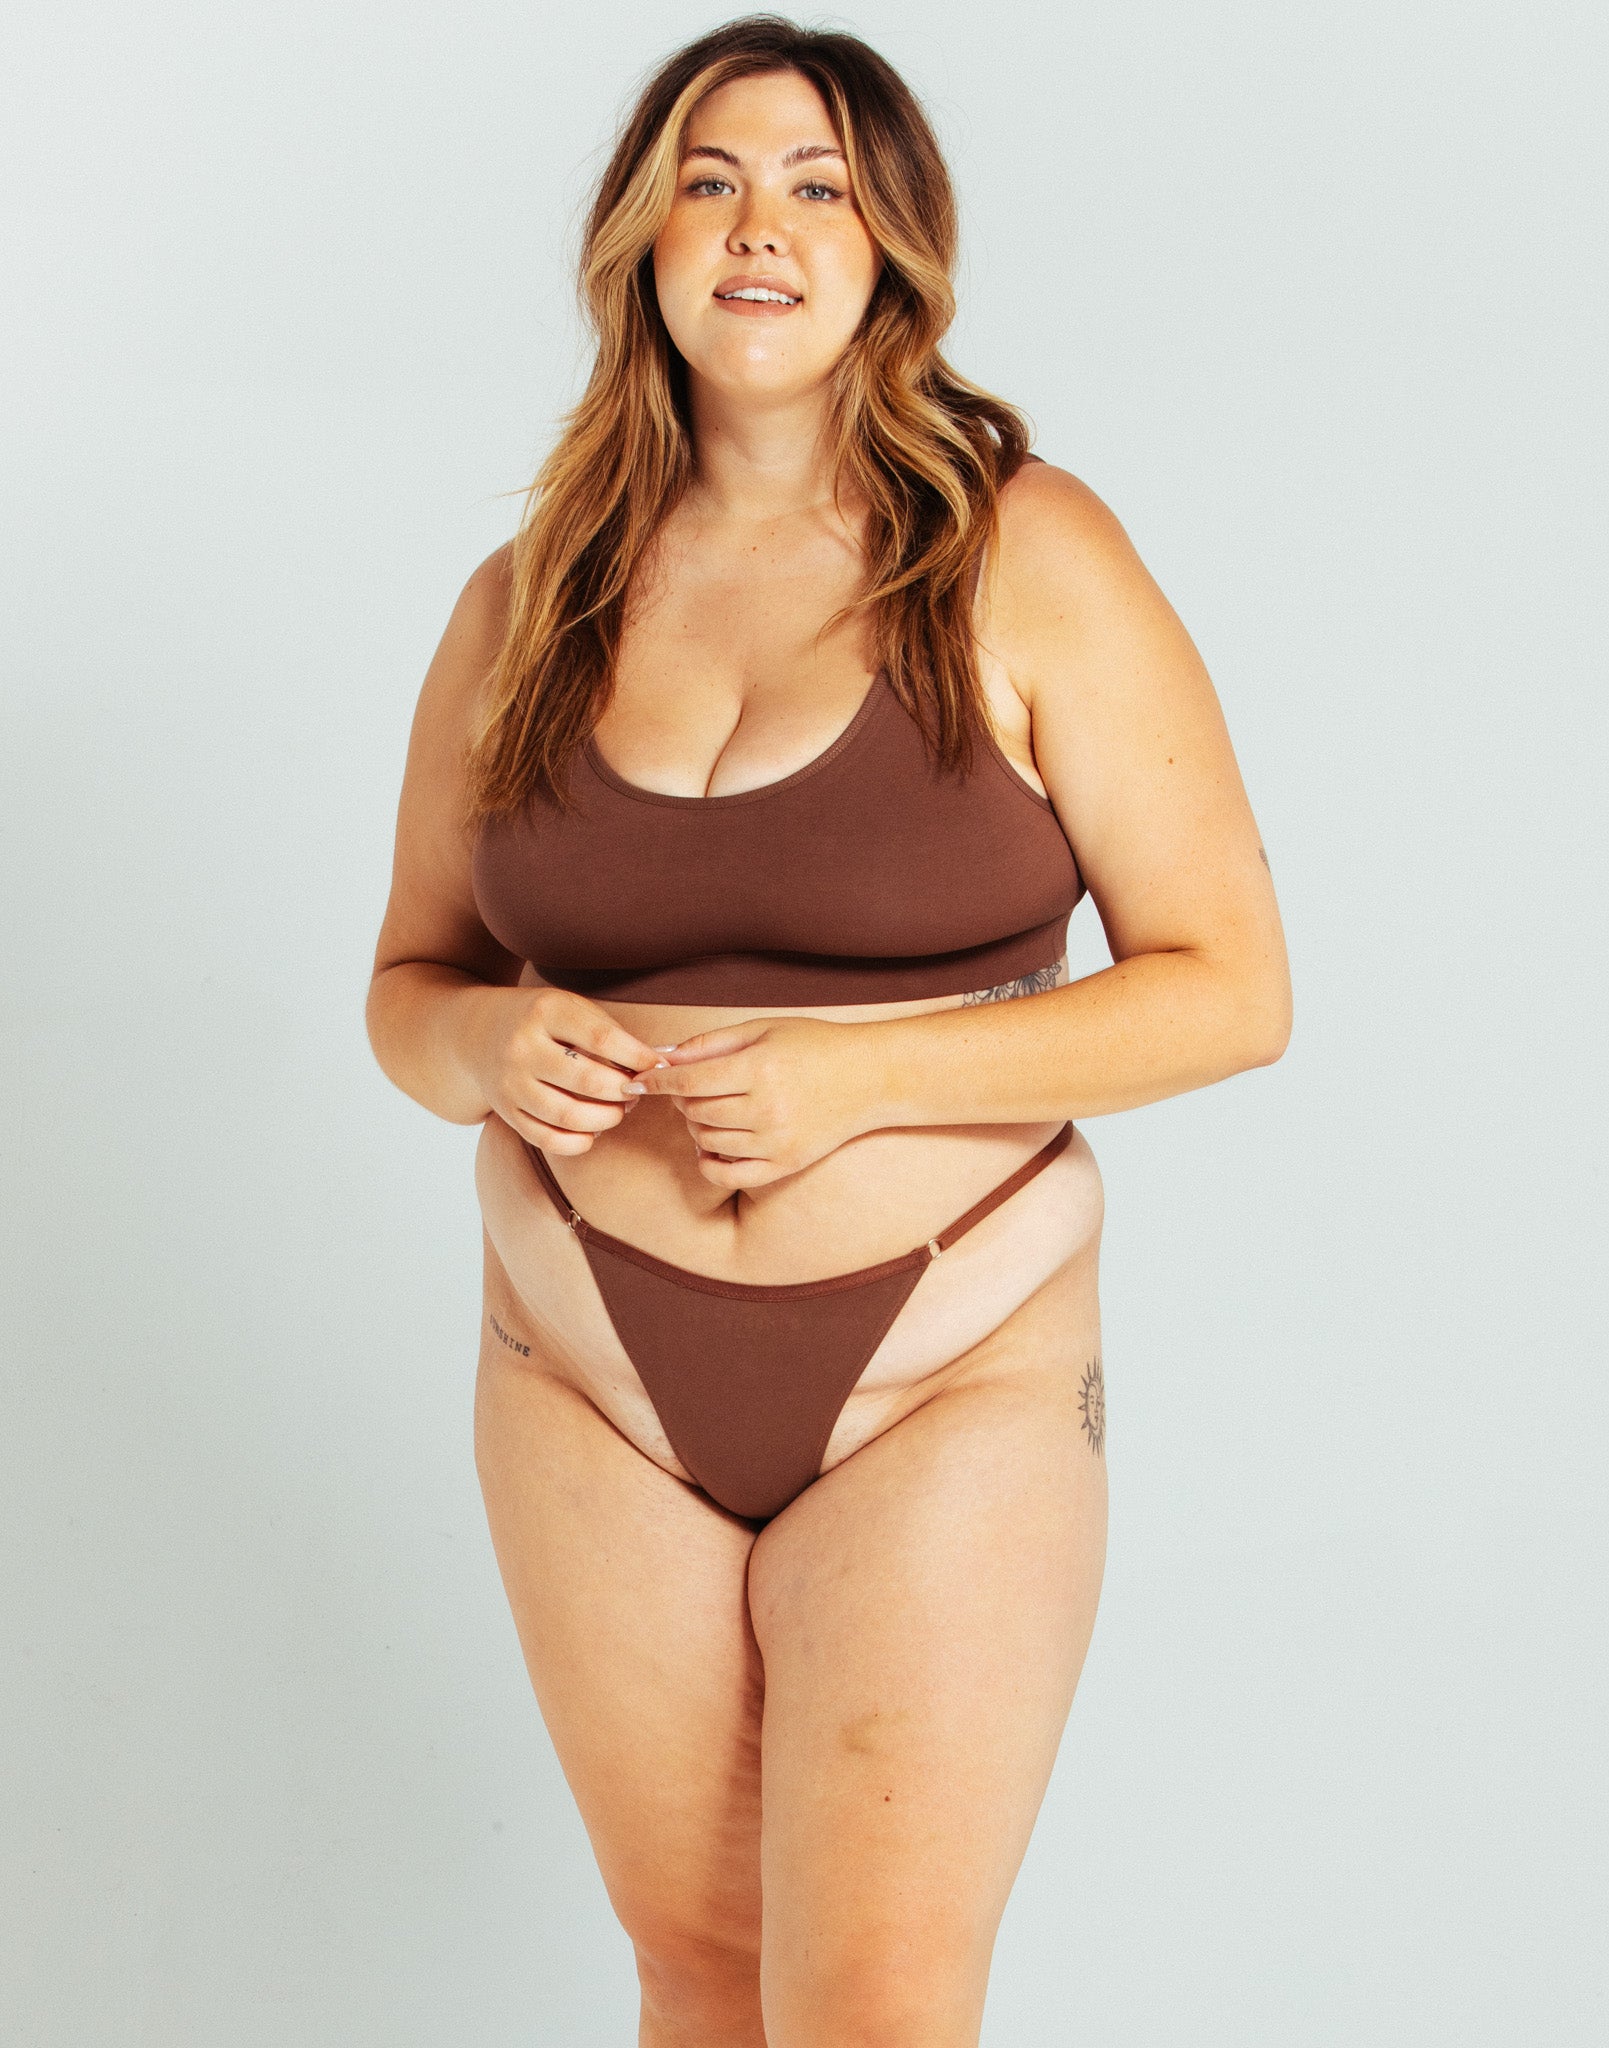 Adjustable String Thong - Cocoa